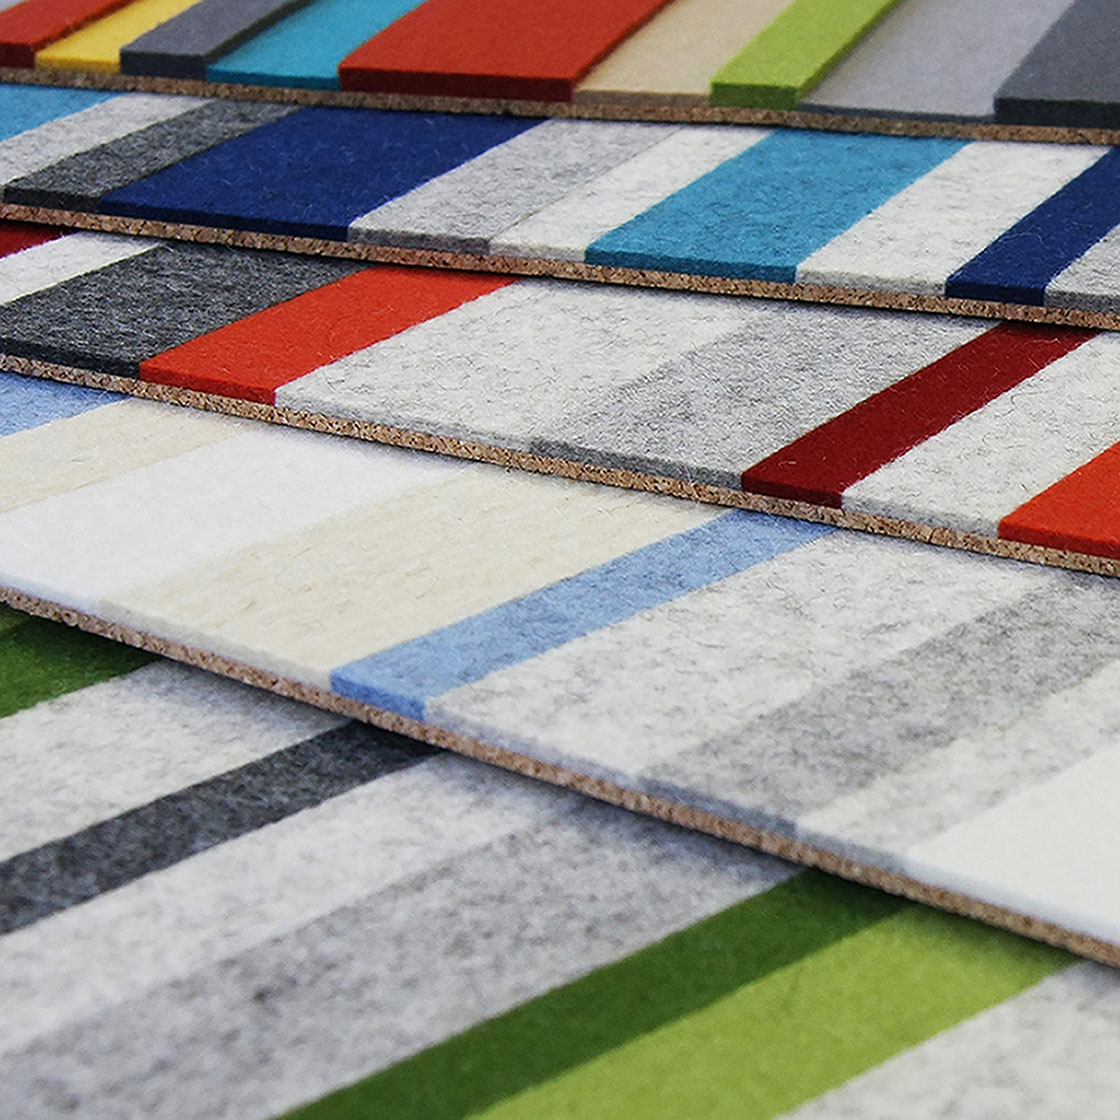 Sheets of colorblocked felt in grays, blues, and reds attached to a cork backing.